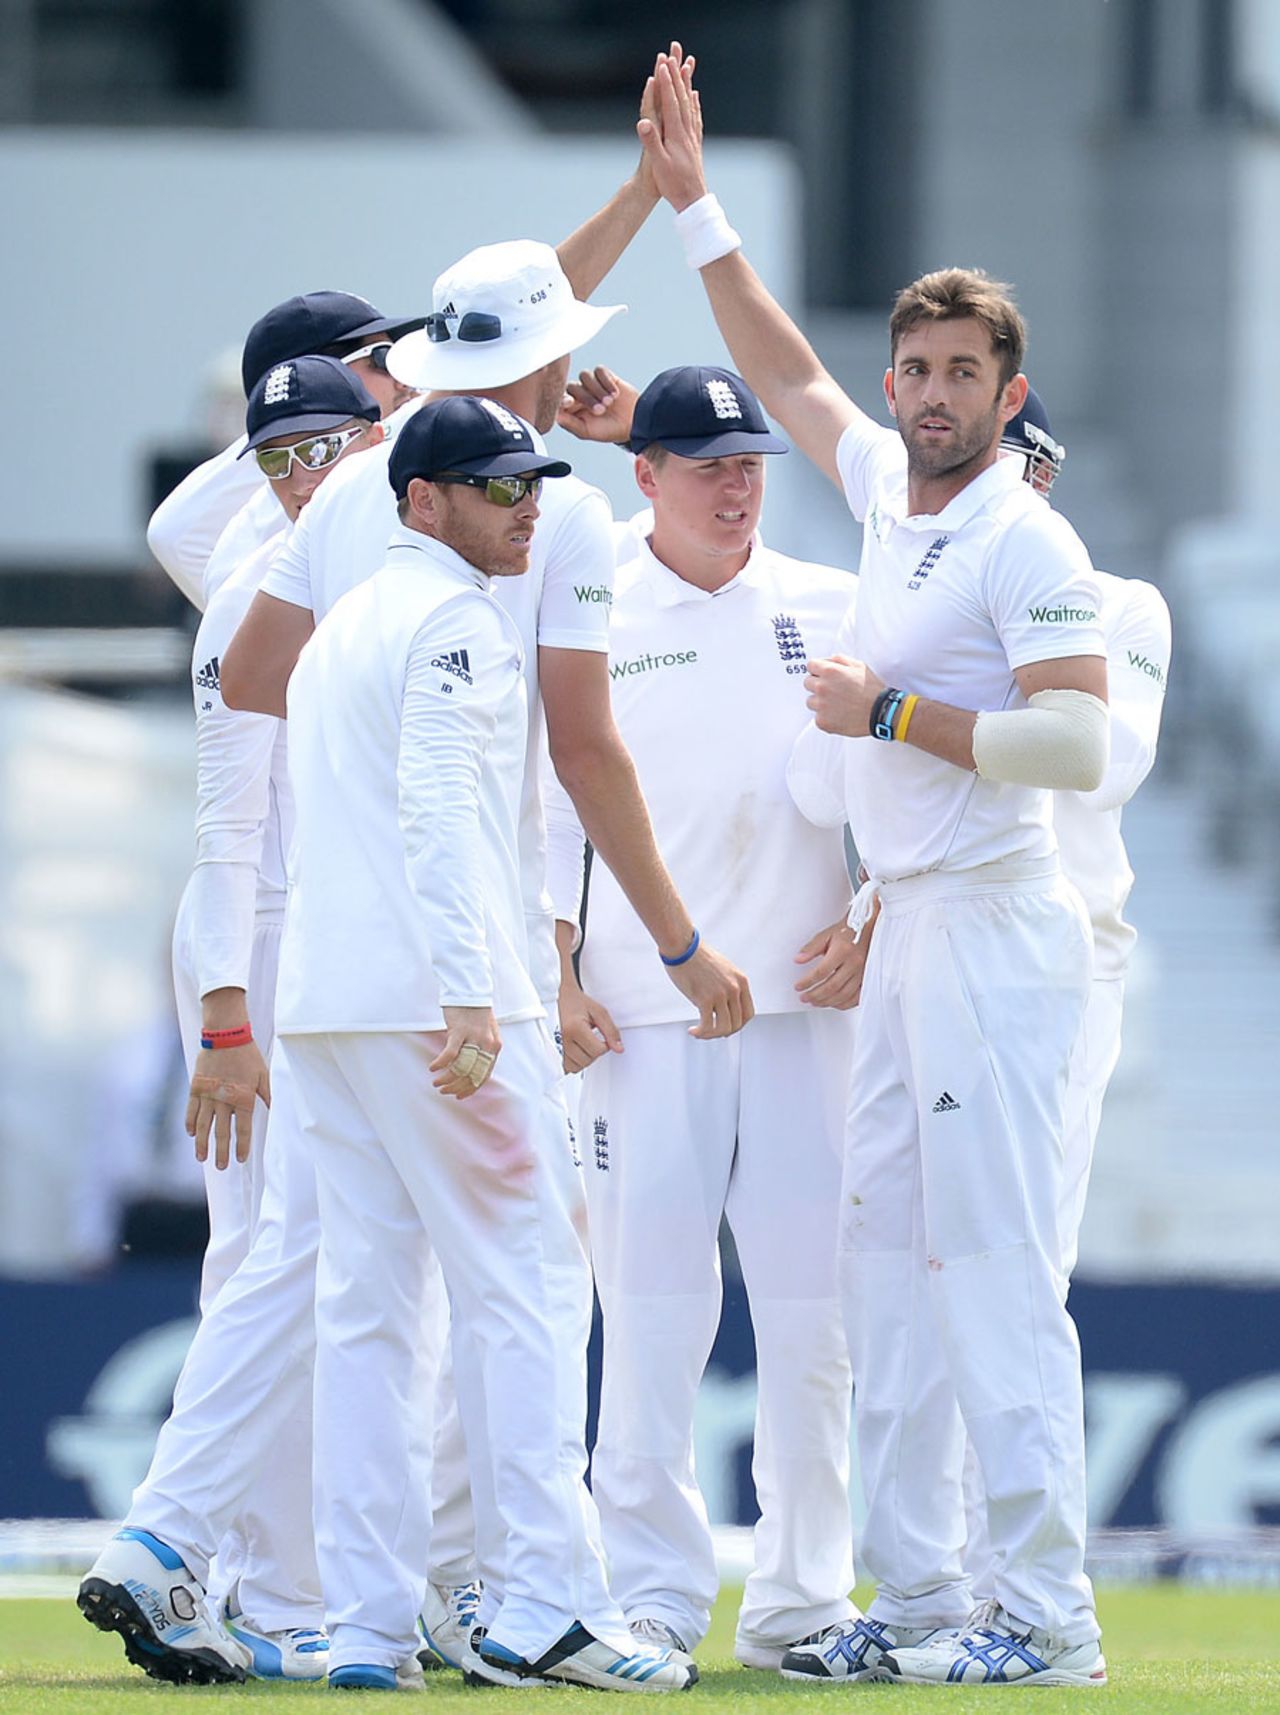 Liam Plunkett claimed the first wicket to fall, England v Sri Lanka, 2nd Investec Test, Headingley, 3rd day, June 22, 2014